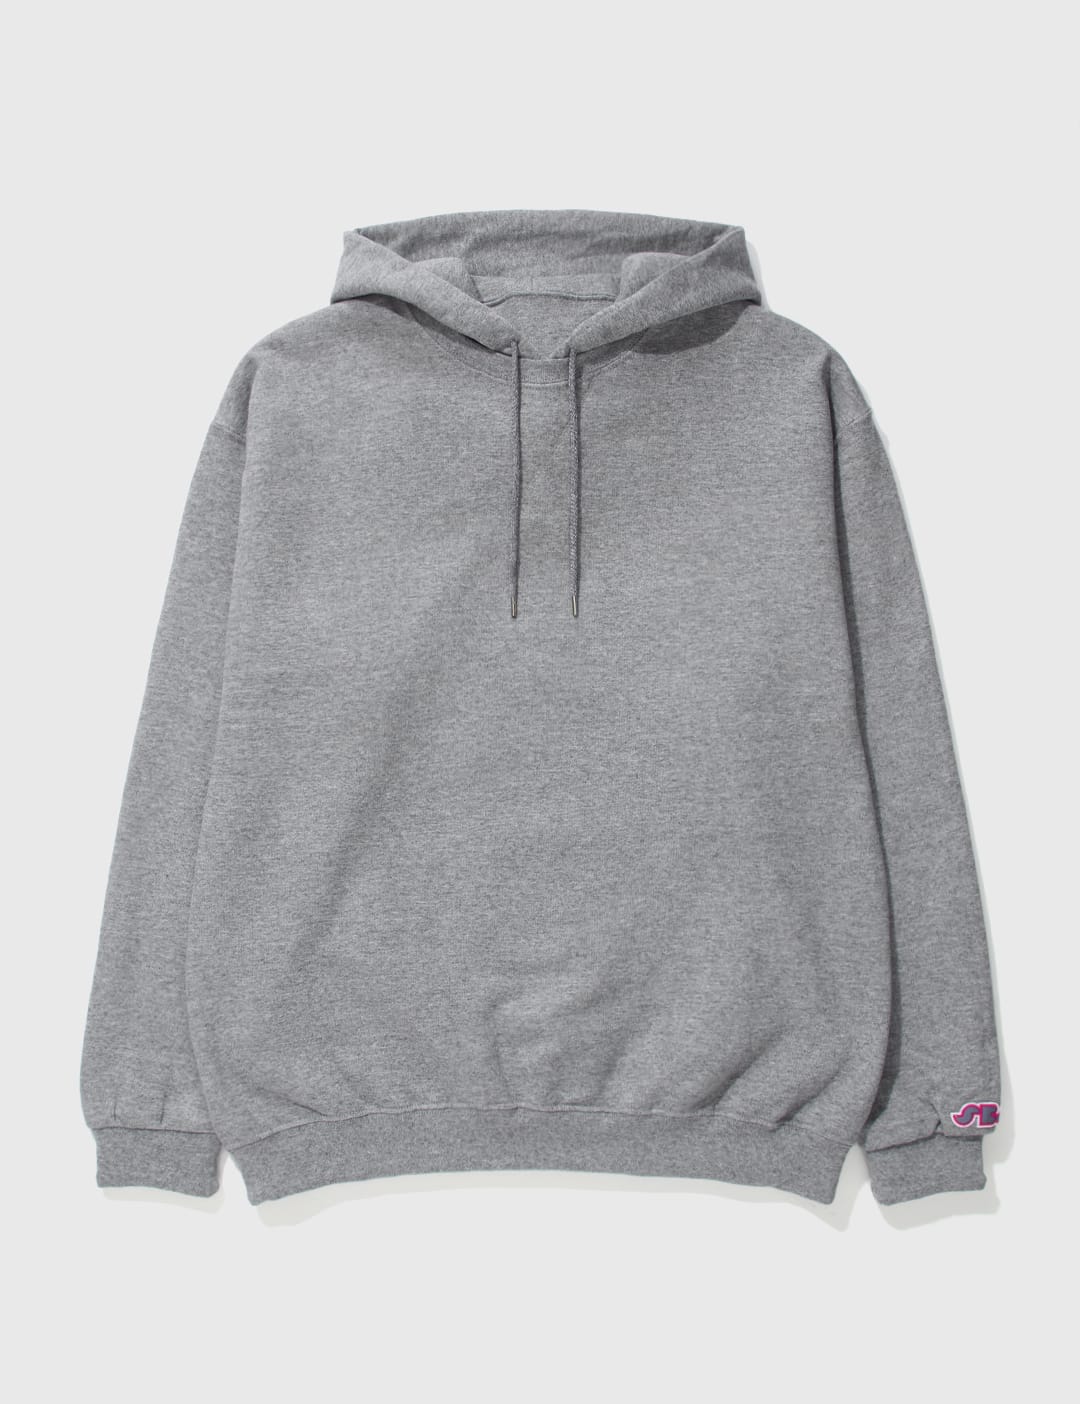 Seven by seven - Reversible Hoodie | HBX - Globally Curated